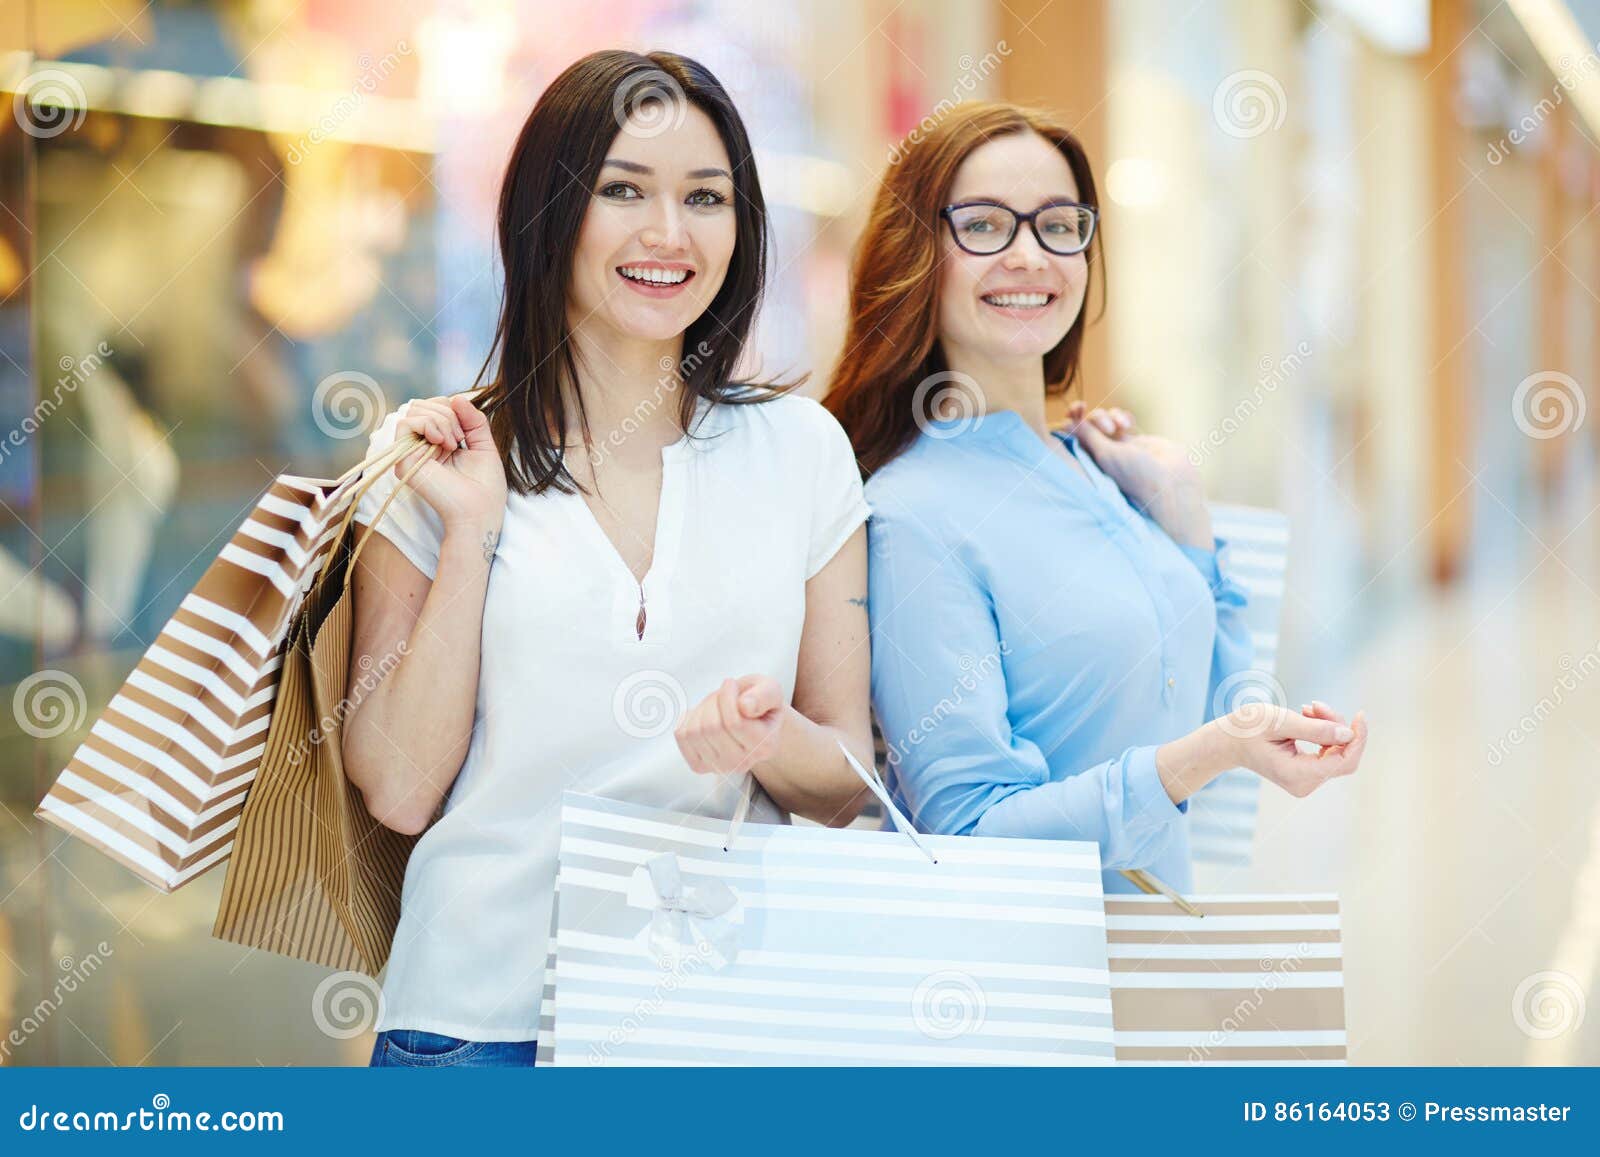 Favorite pastime stock image. Image of spend, adolescent - 86164053